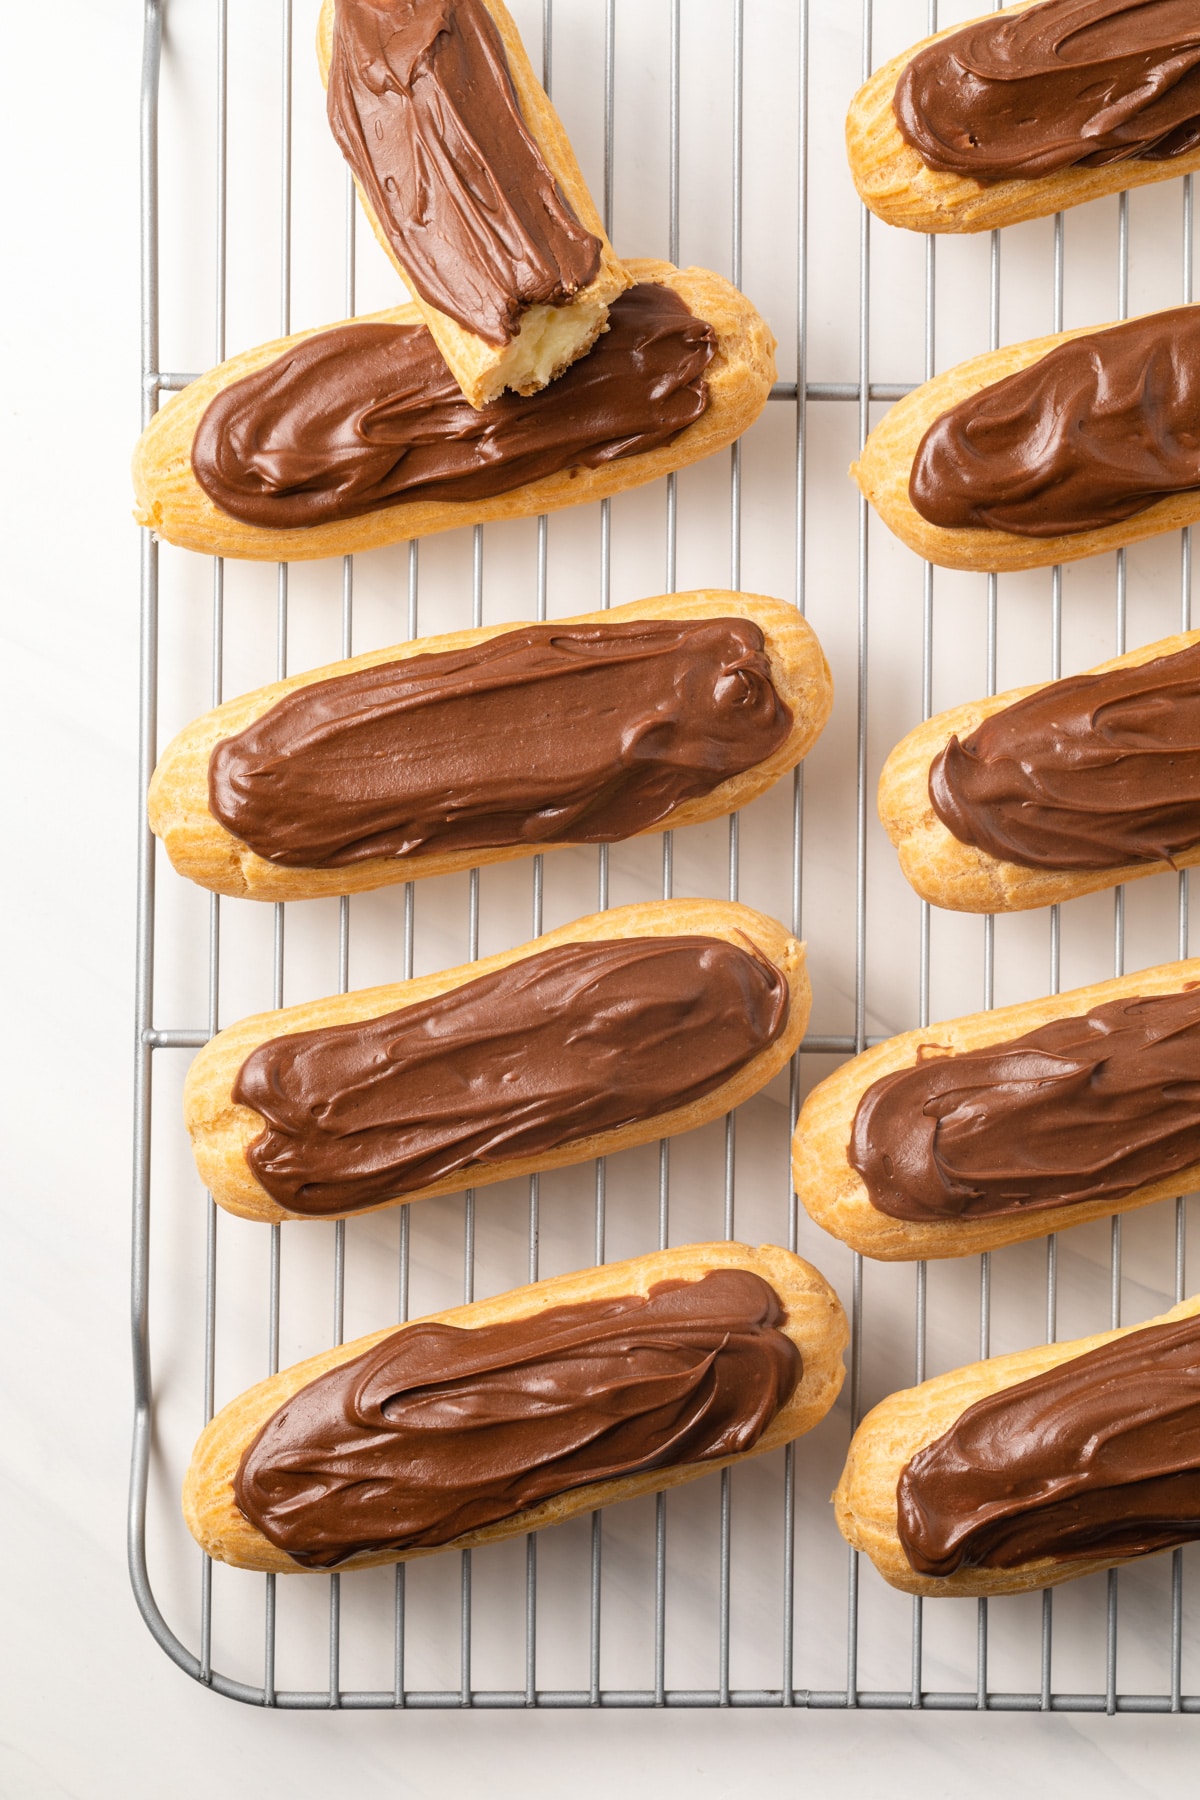 Overhead of classic chocolate eclairs on wire rack.